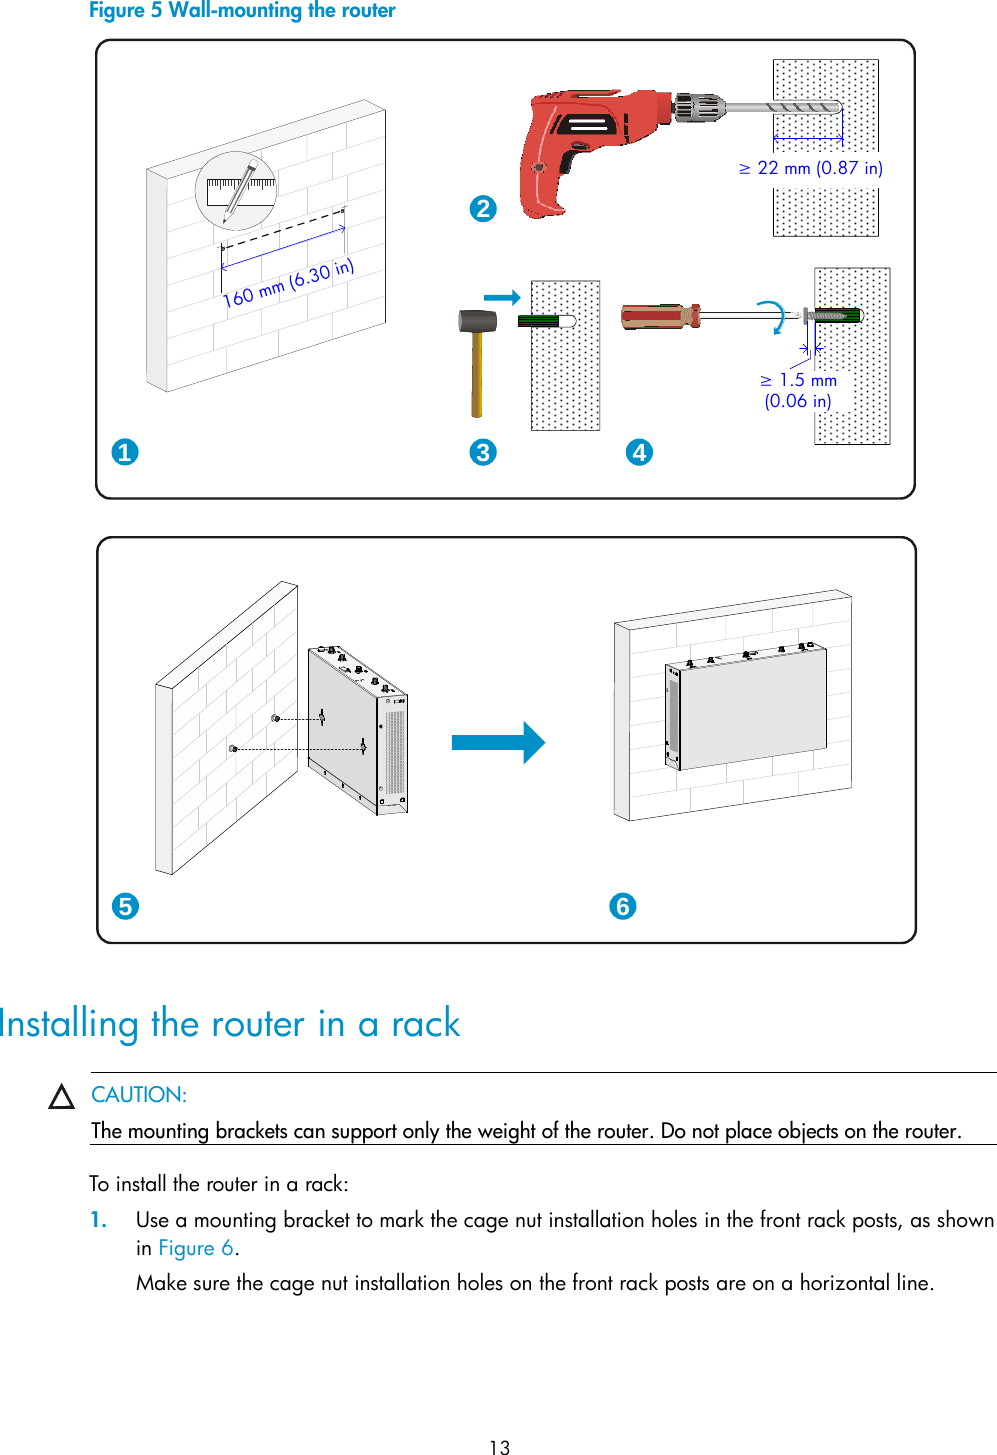  13 Figure 5 Wall-mounting the router   Installing the router in a rack  CAUTION: The mounting brackets can support only the weight of the router. Do not place objects on the router.  To install the router in a rack: 1. Use a mounting bracket to mark the cage nut installation holes in the front rack posts, as shown in Figure 6.  Make sure the cage nut installation holes on the front rack posts are on a horizontal line. 1 32≥ 22 mm (0.87 in)≥ 1.5 mm(0.06 in)45 6160mm(6.30 in)